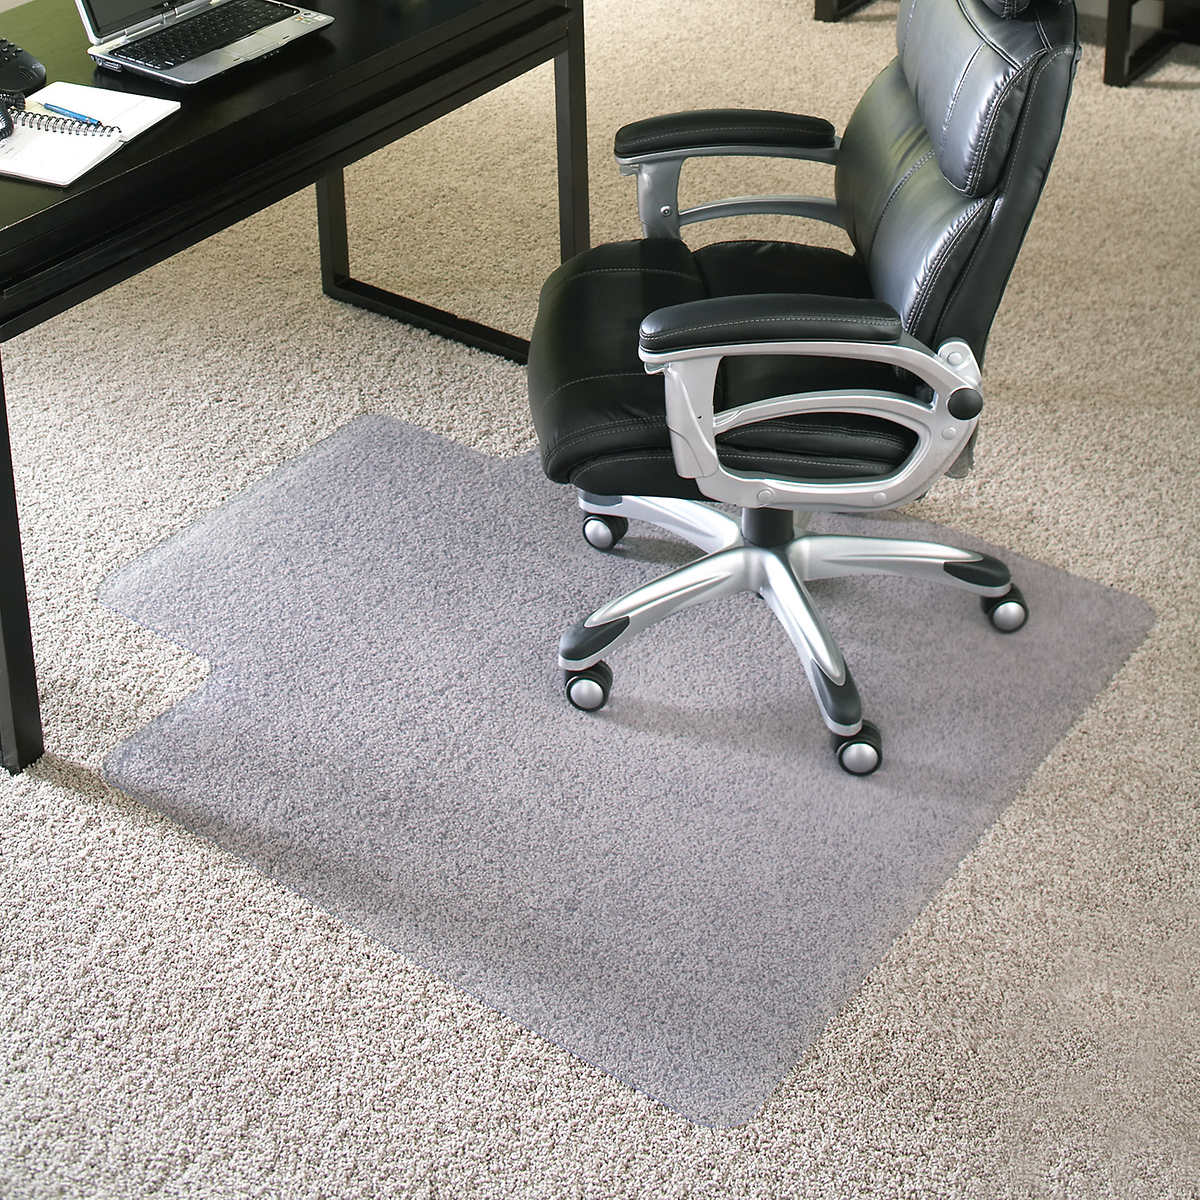 16 Best Chair mat keeps moving for Furniture Decorating Ideas